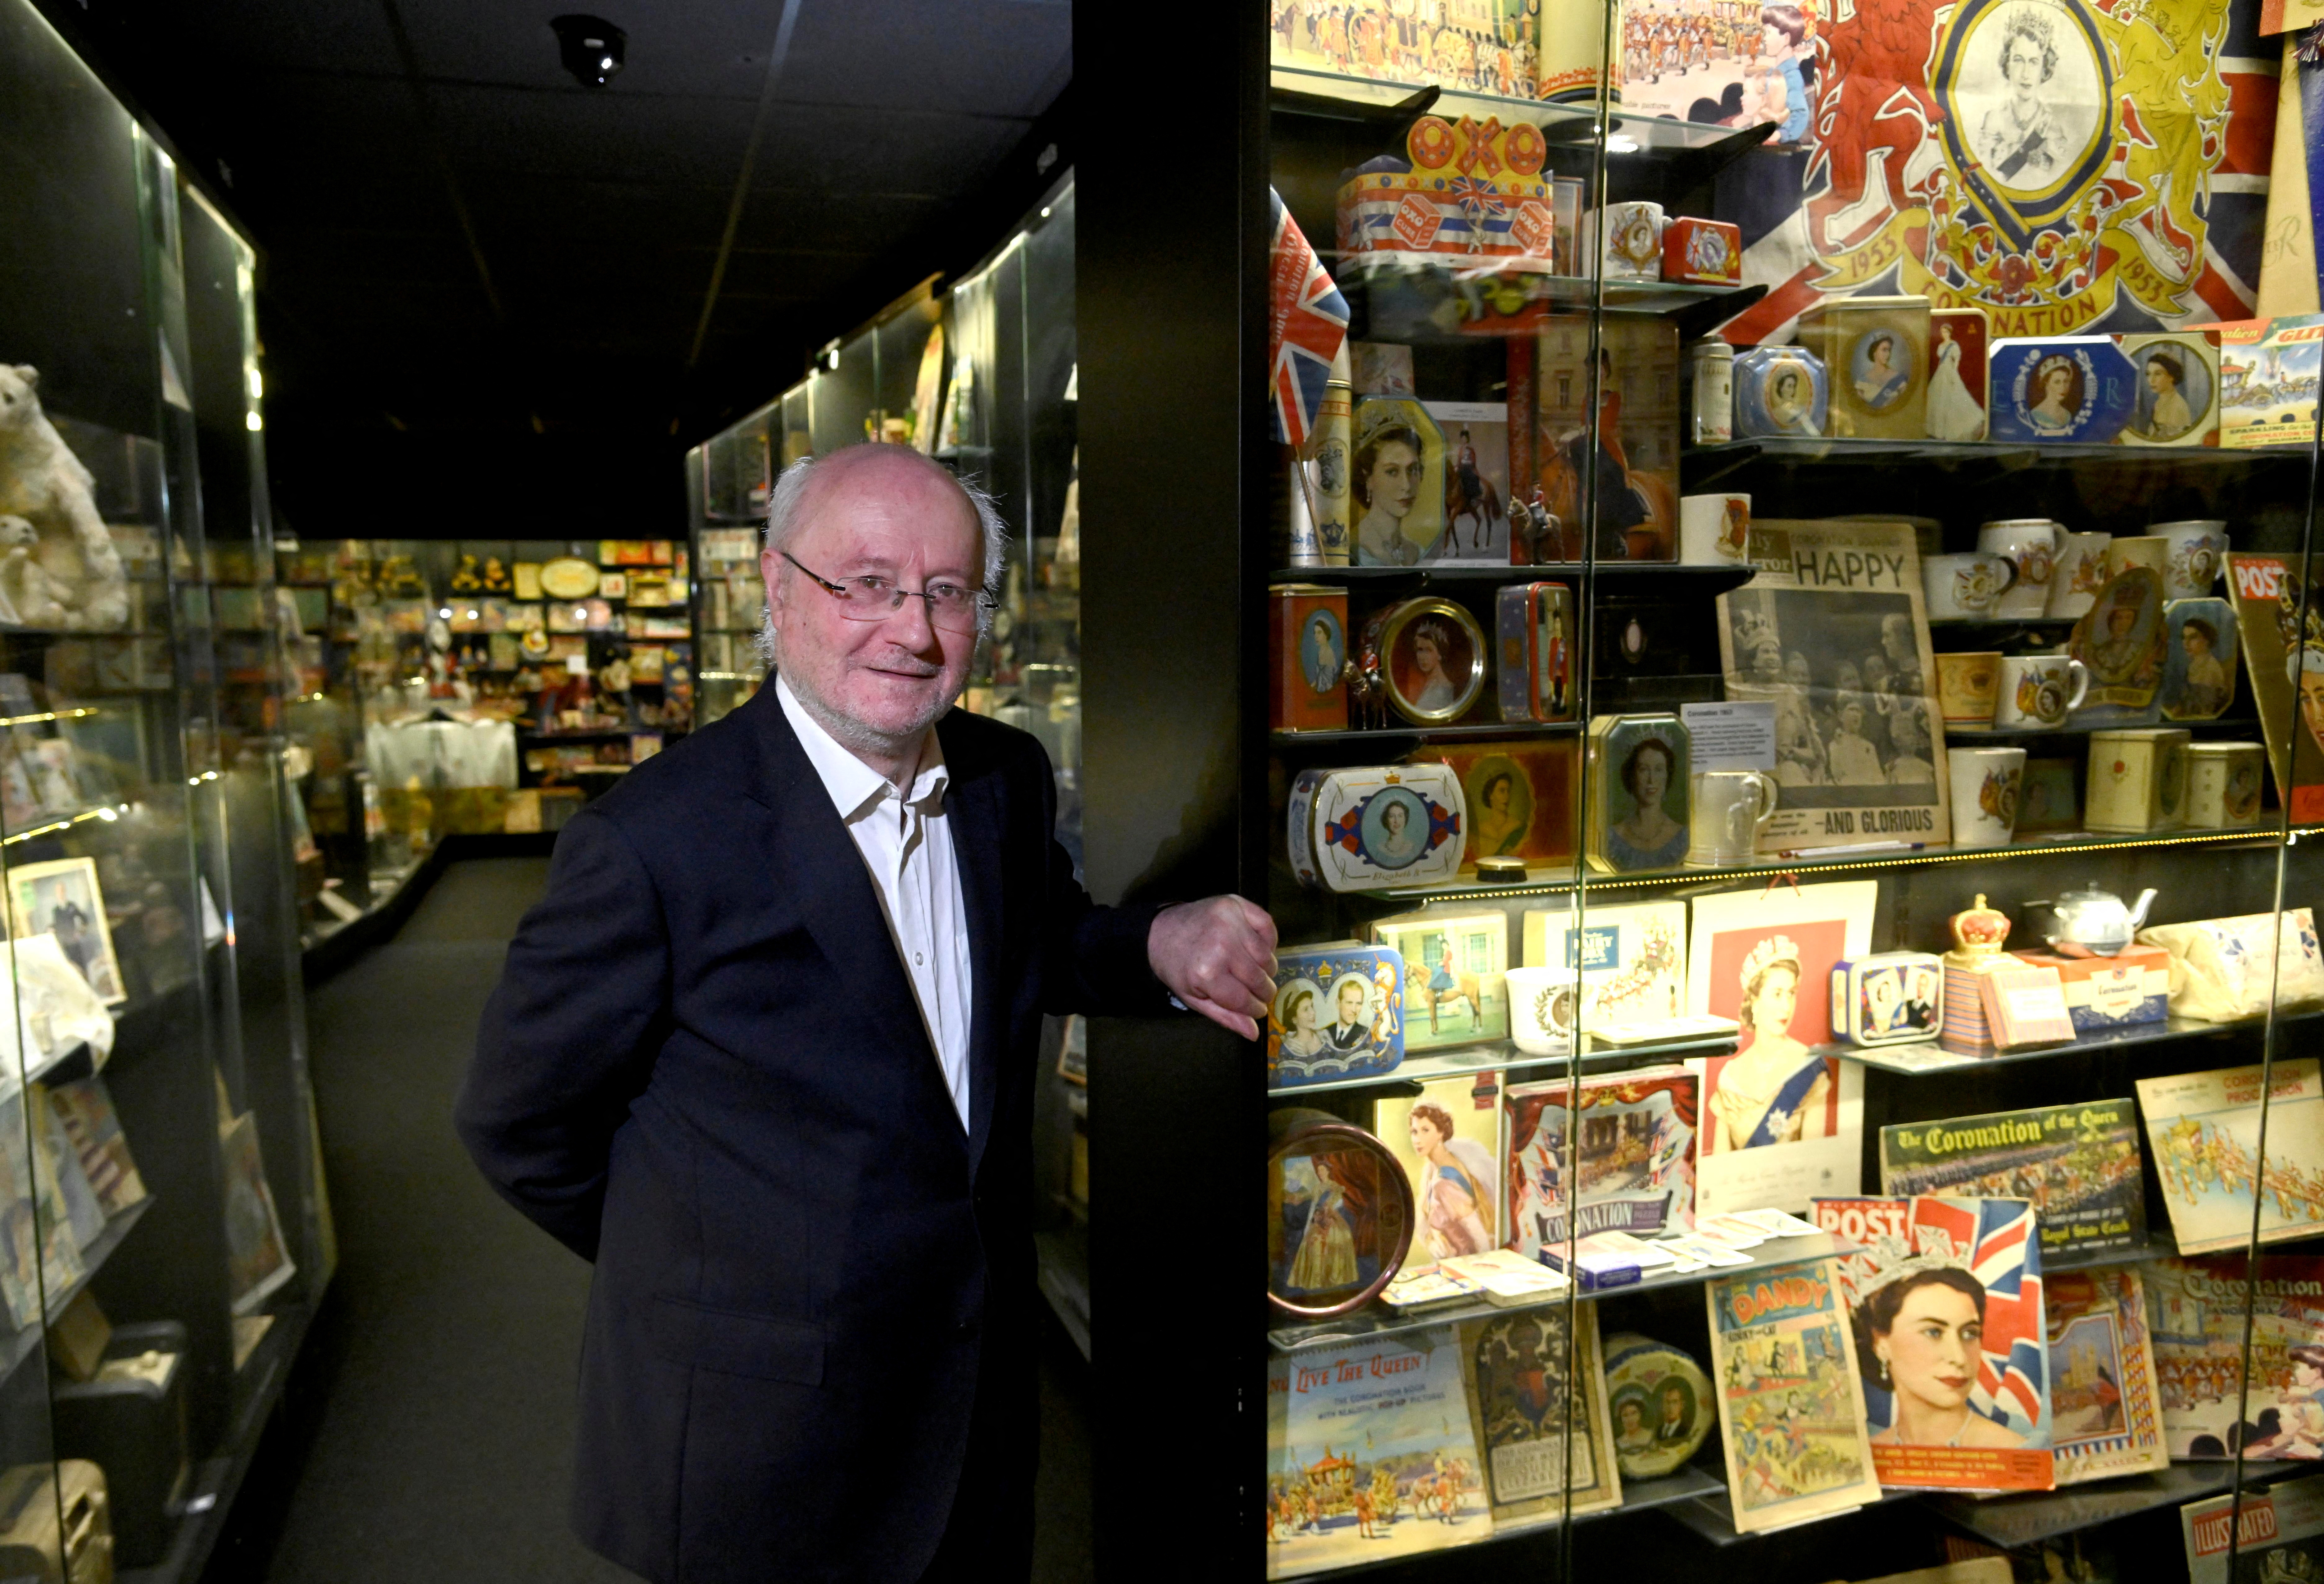 Coronation artefacts and souvenirs amongst the collections on display at Museum of Brands in London